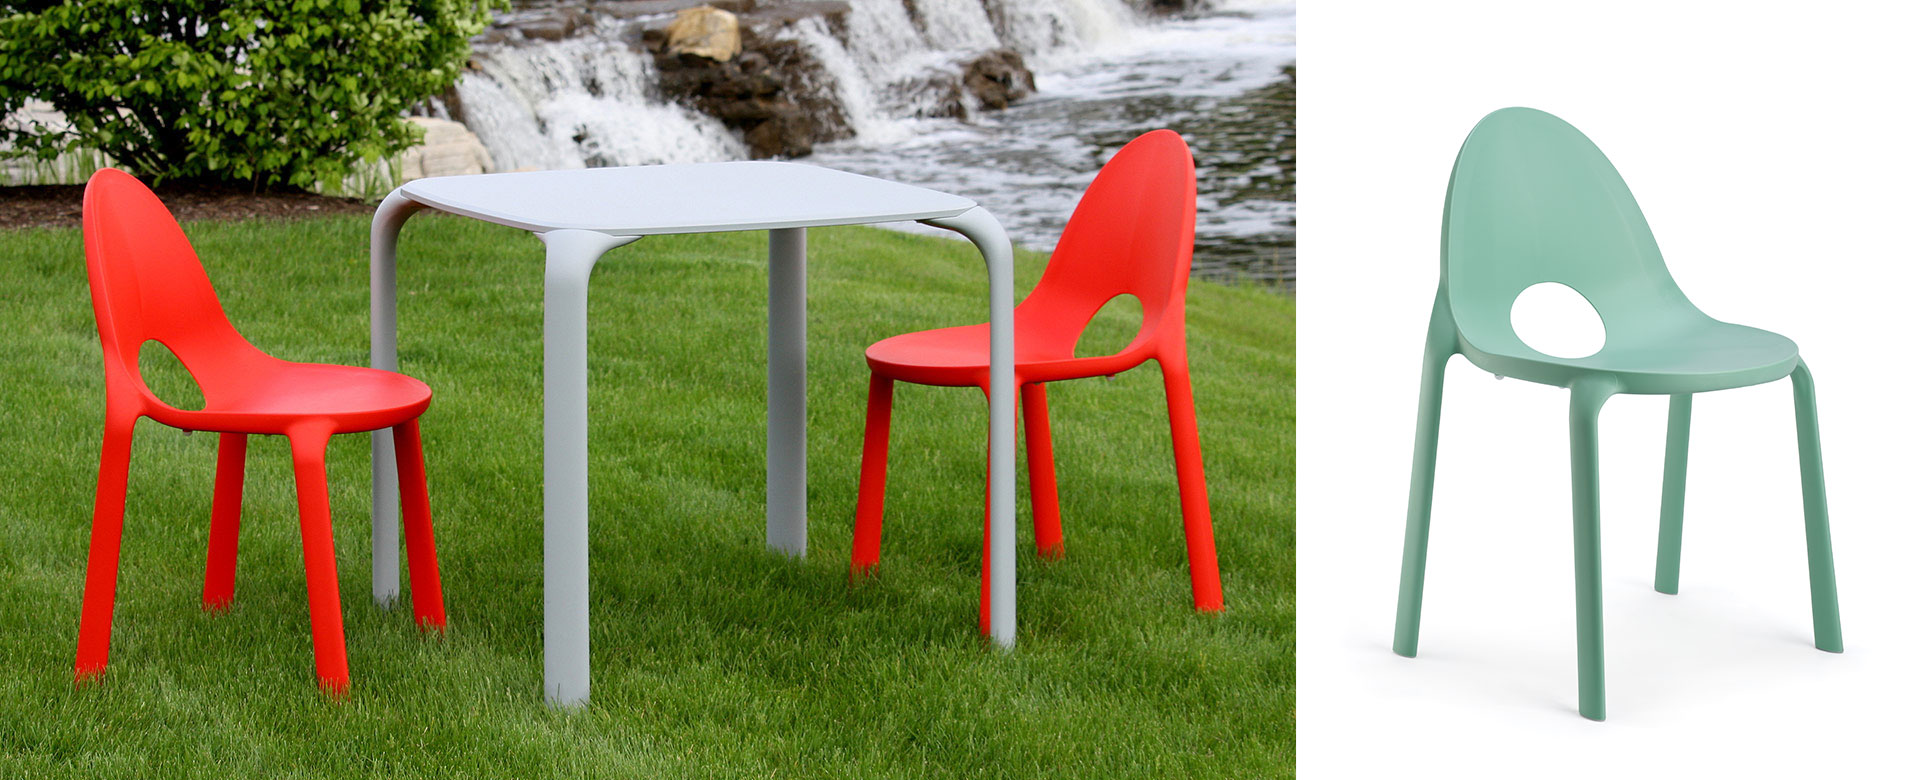 STILLA Outdoor Chairs & Tables